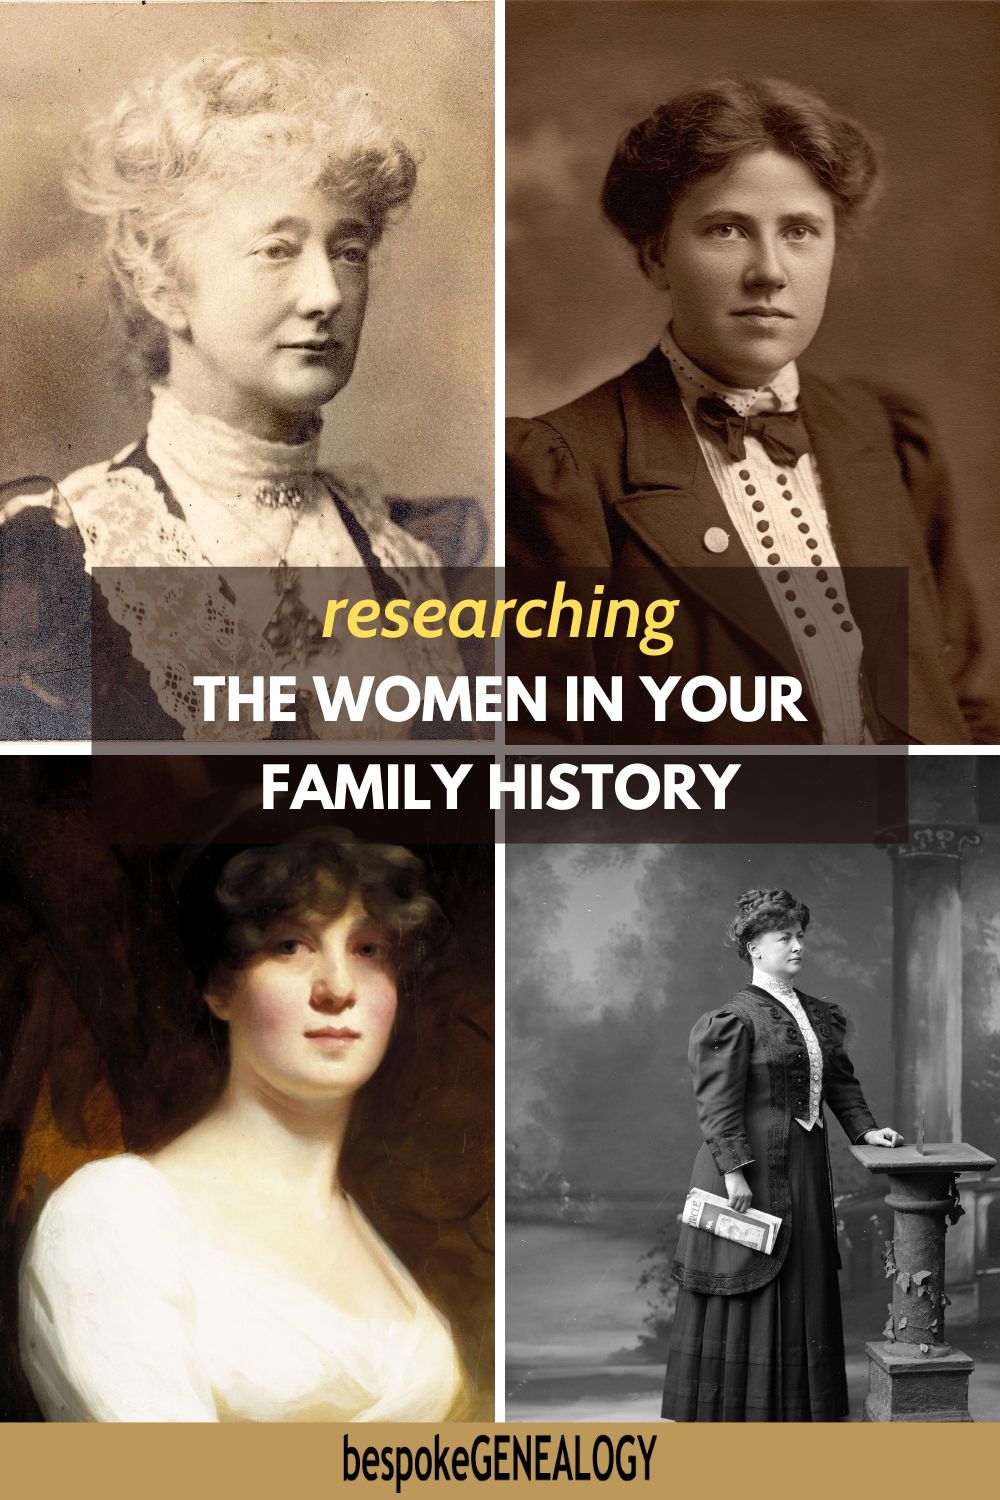 Pinterest pin. Researching the women in your family history. 4 pictures of 18th and 19th century women.